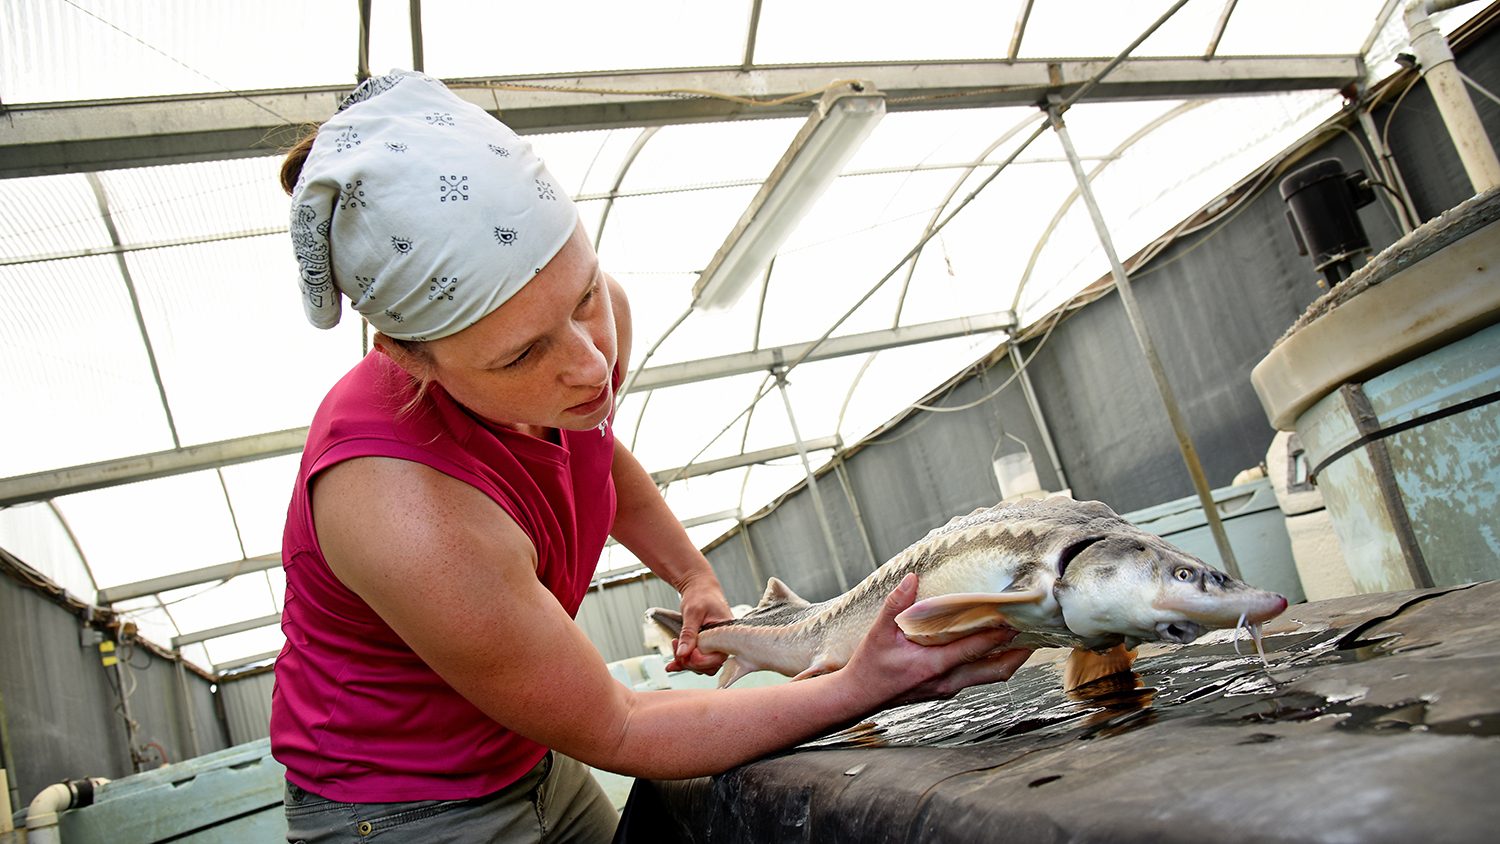 Research Technician checks on sturgeon at a research center.